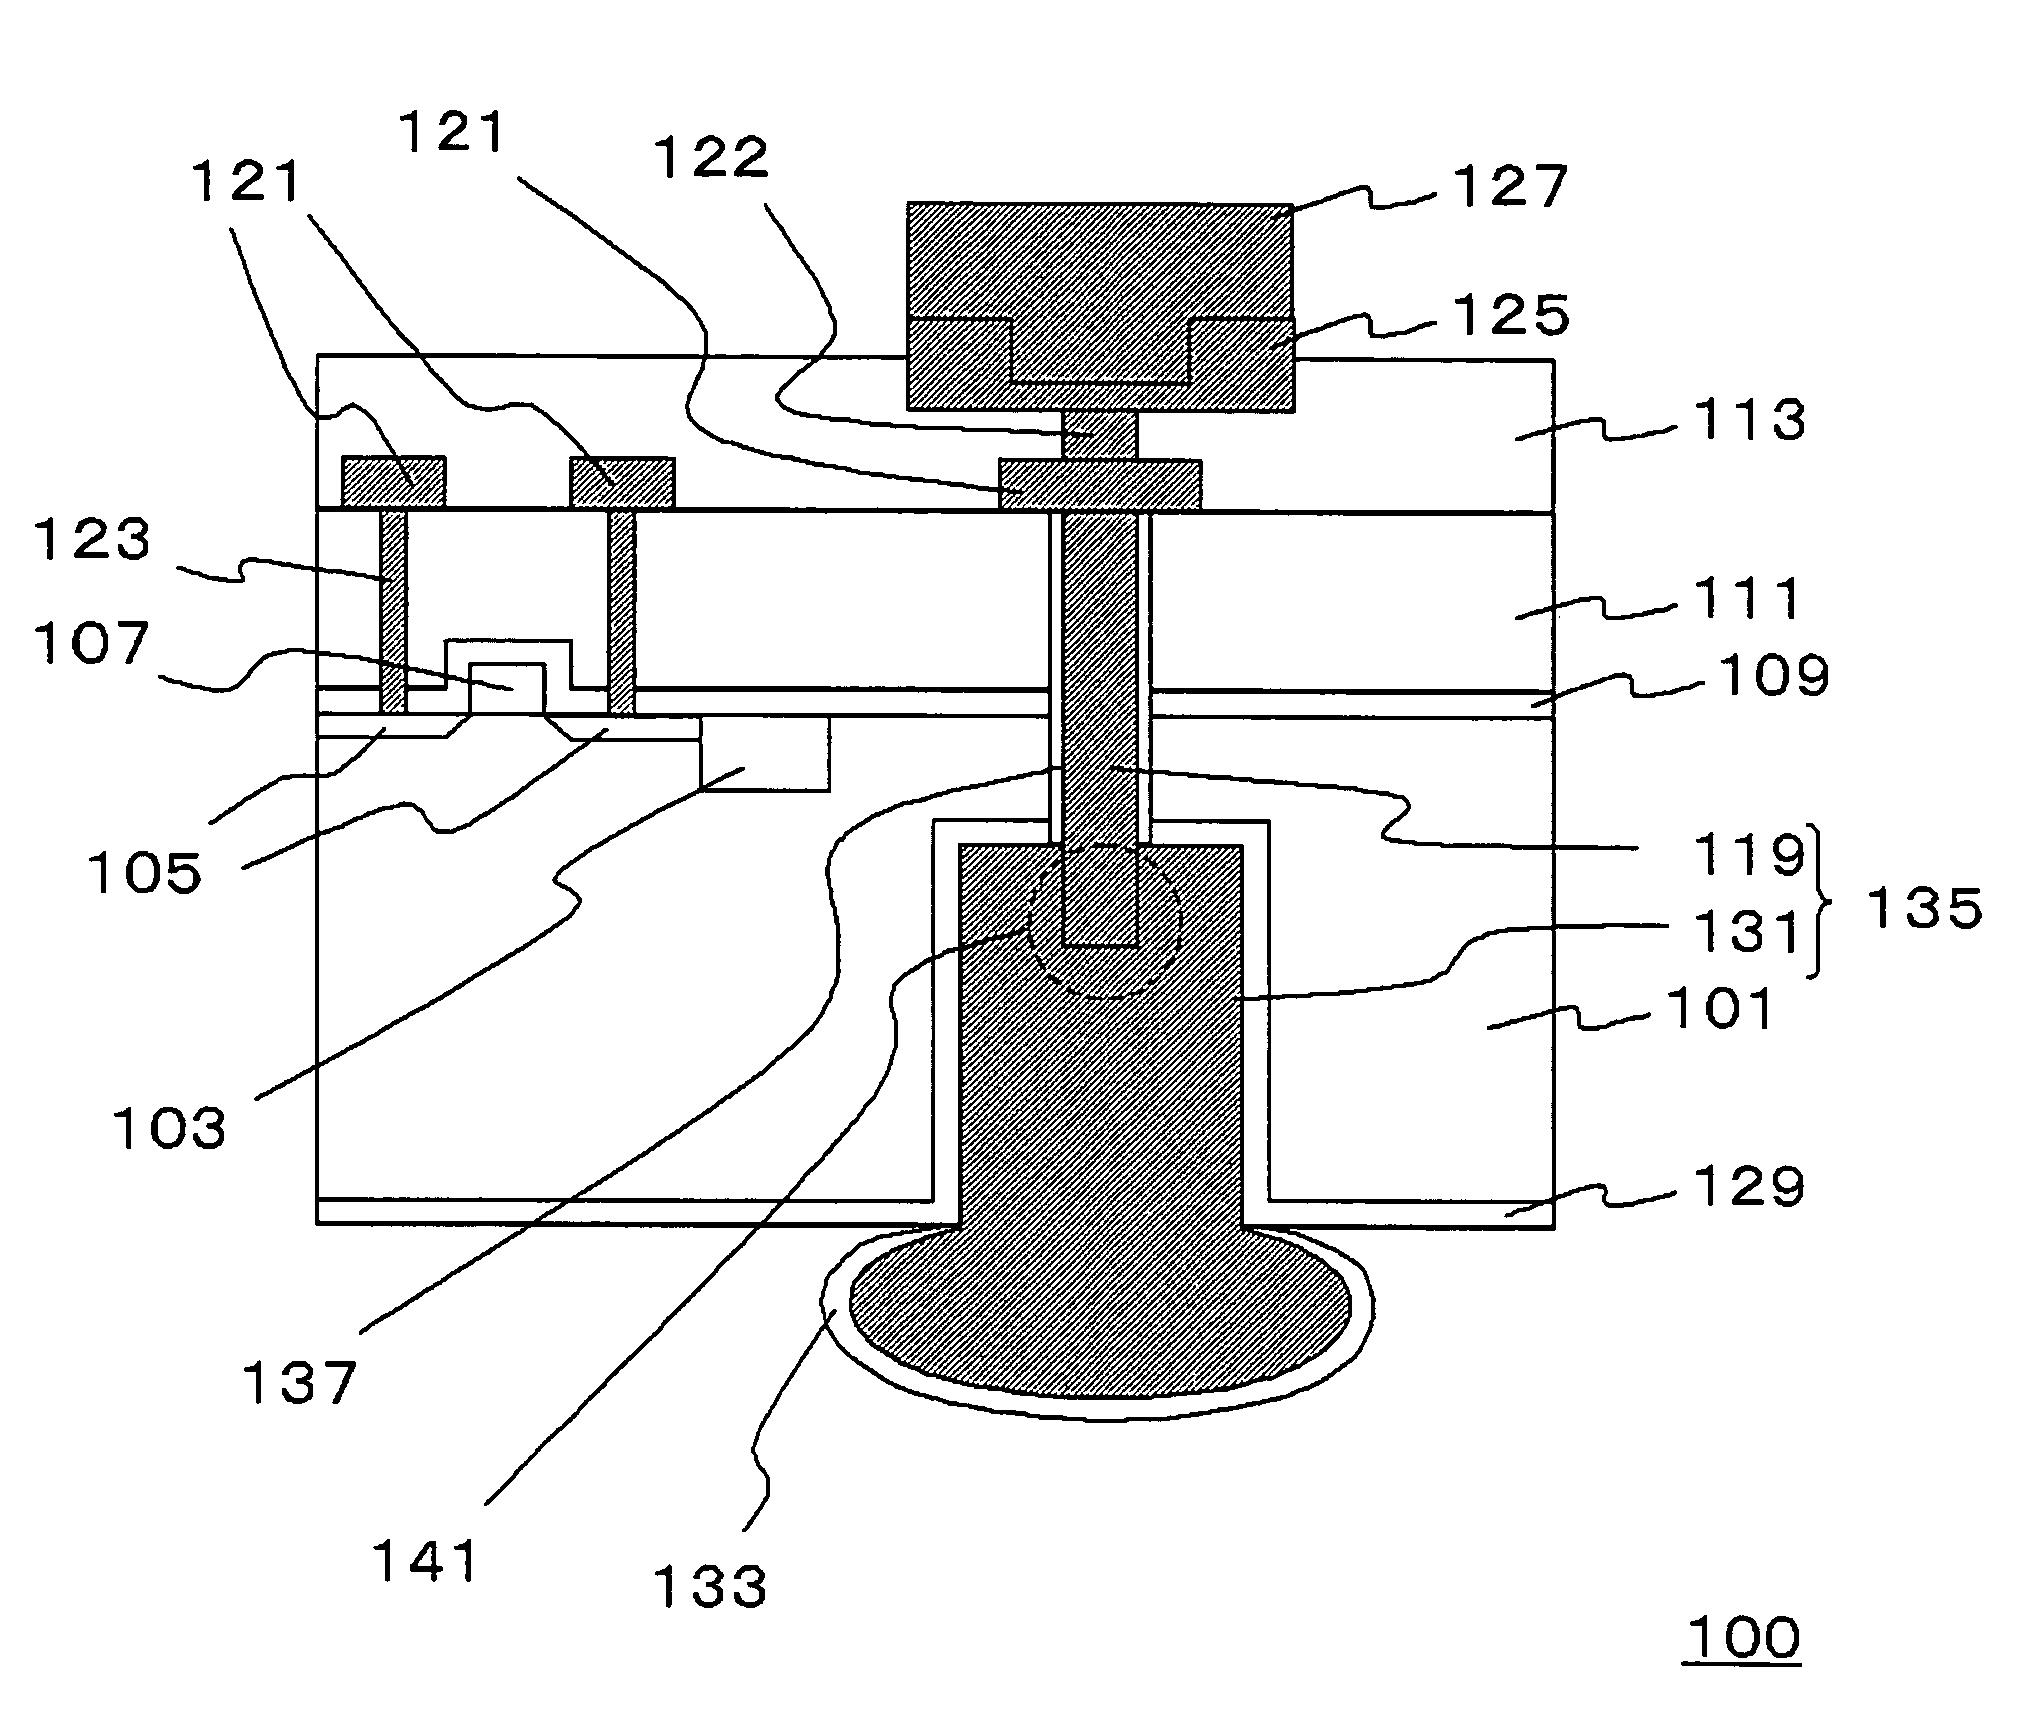 Semiconductor device comprising through-electrode interconnect